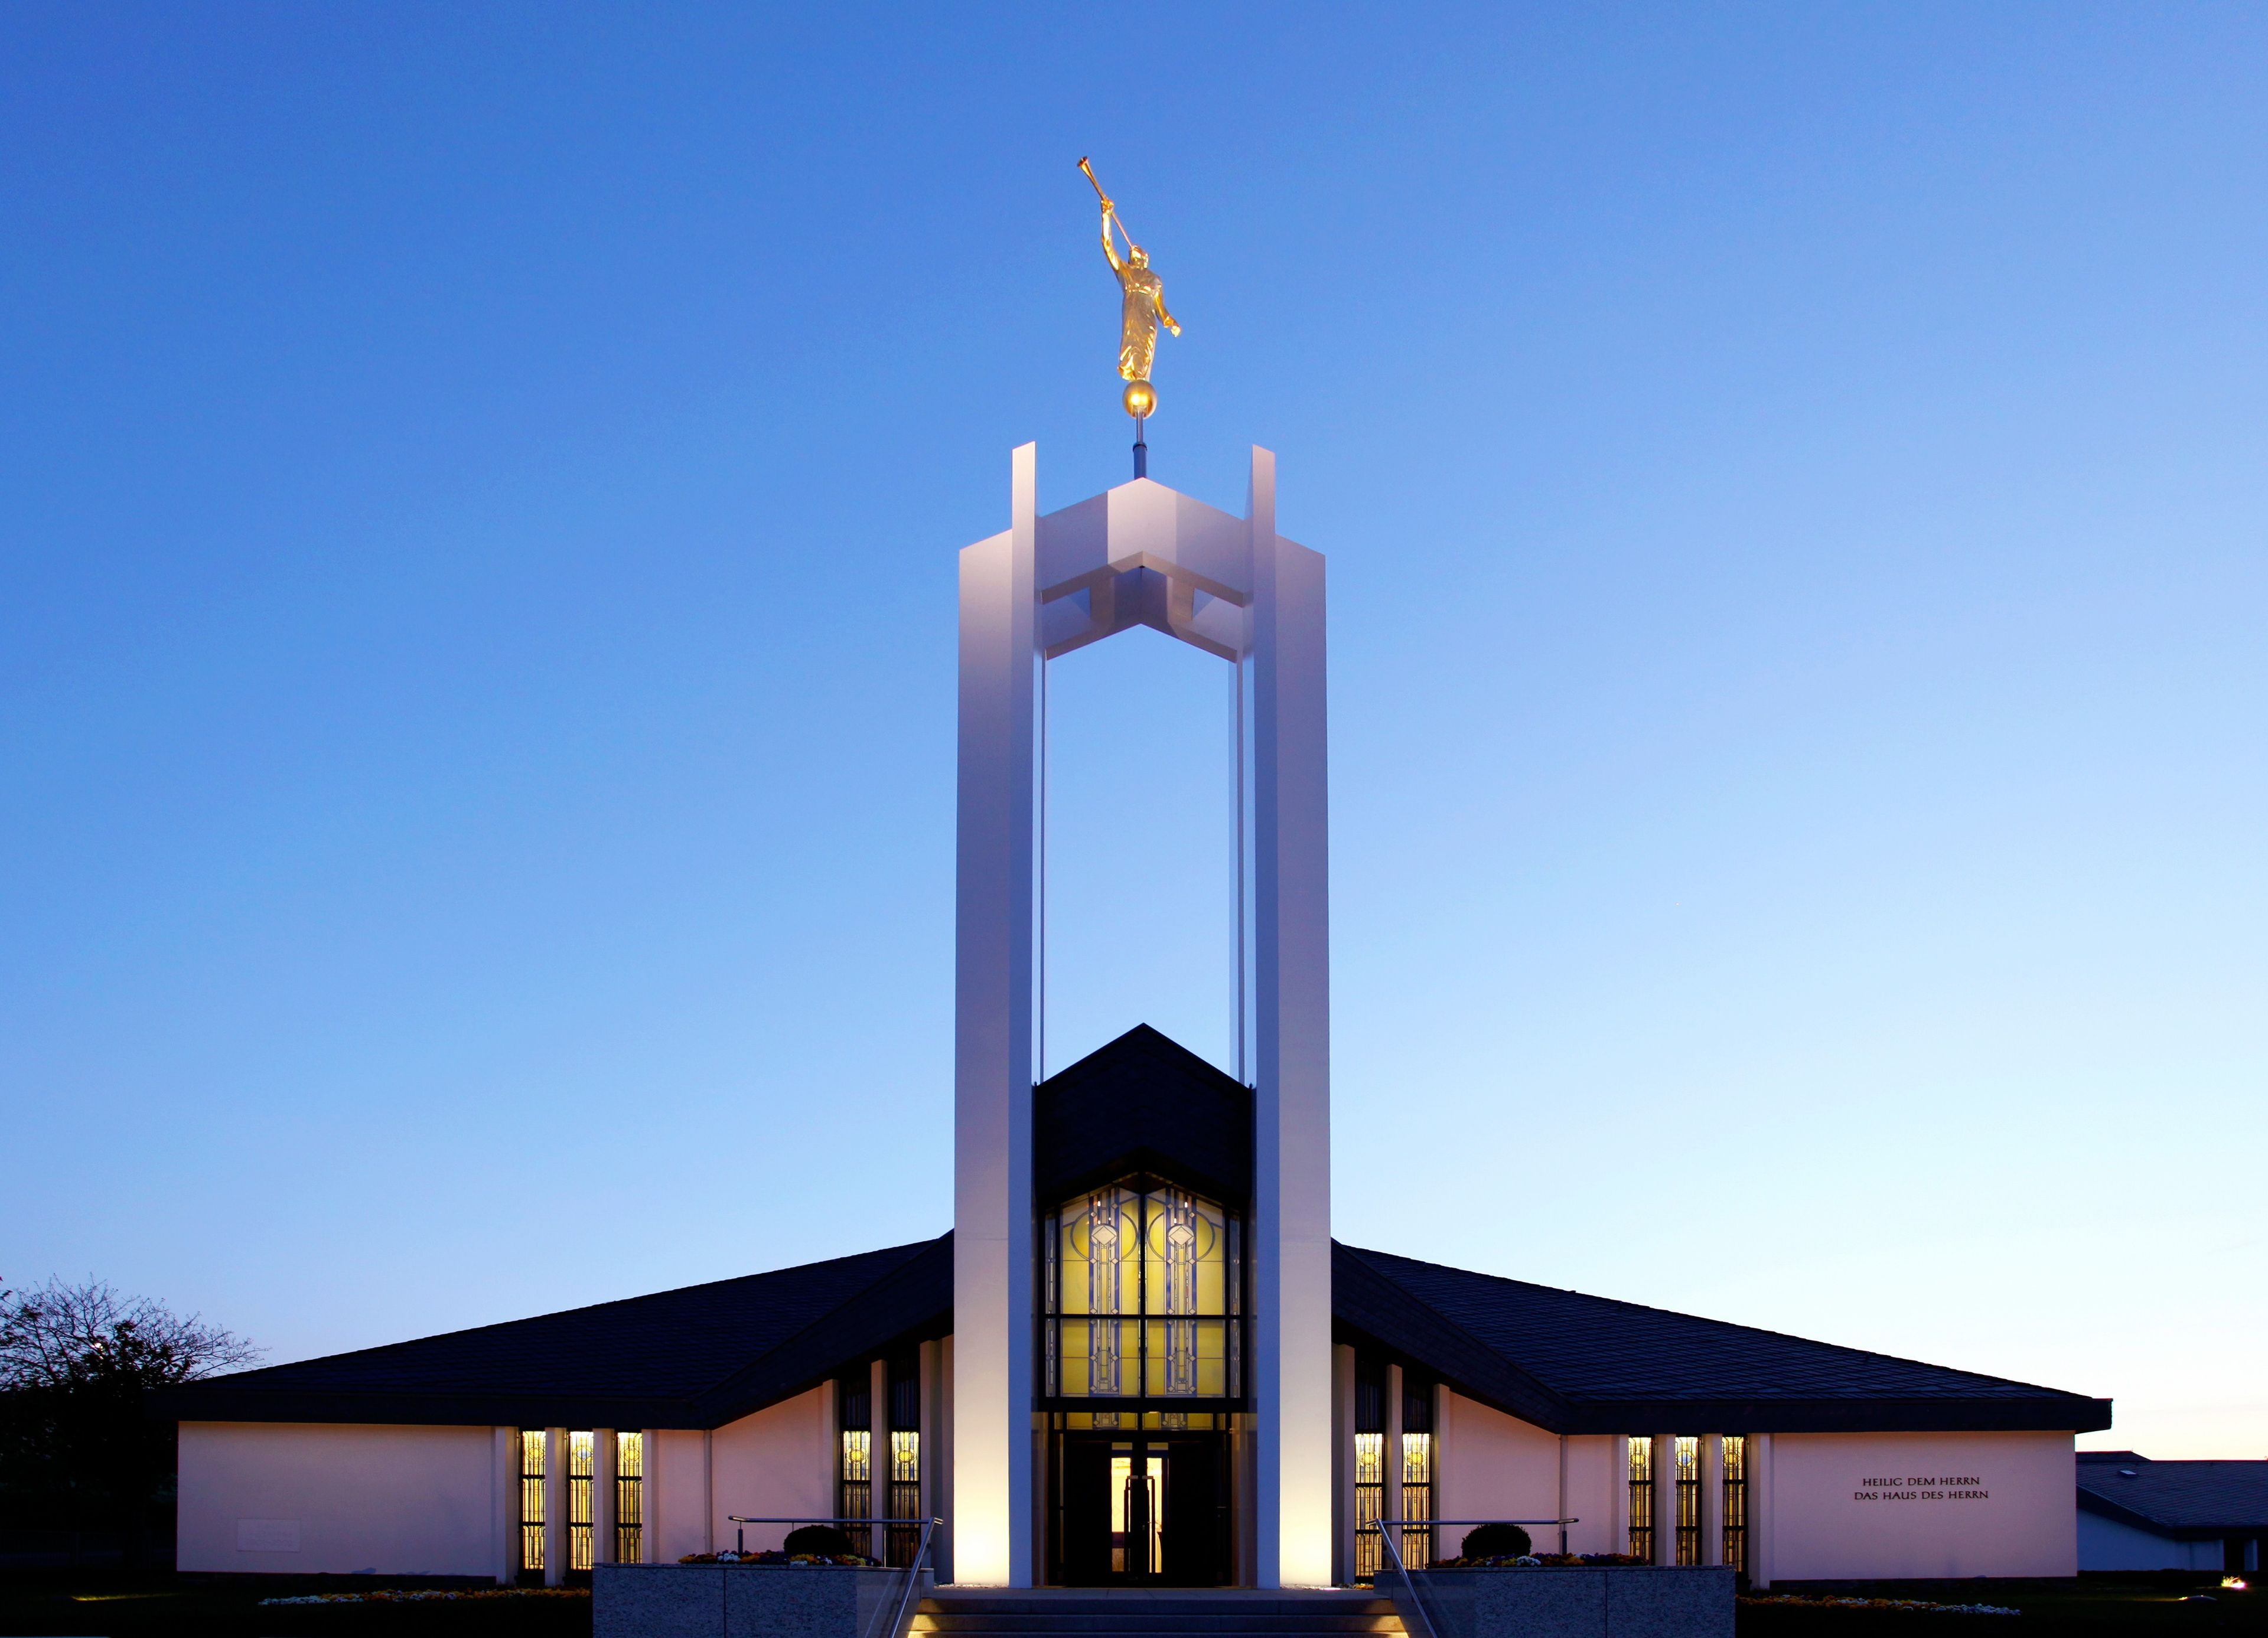 The Freiberg Germany Temple lit up at night.